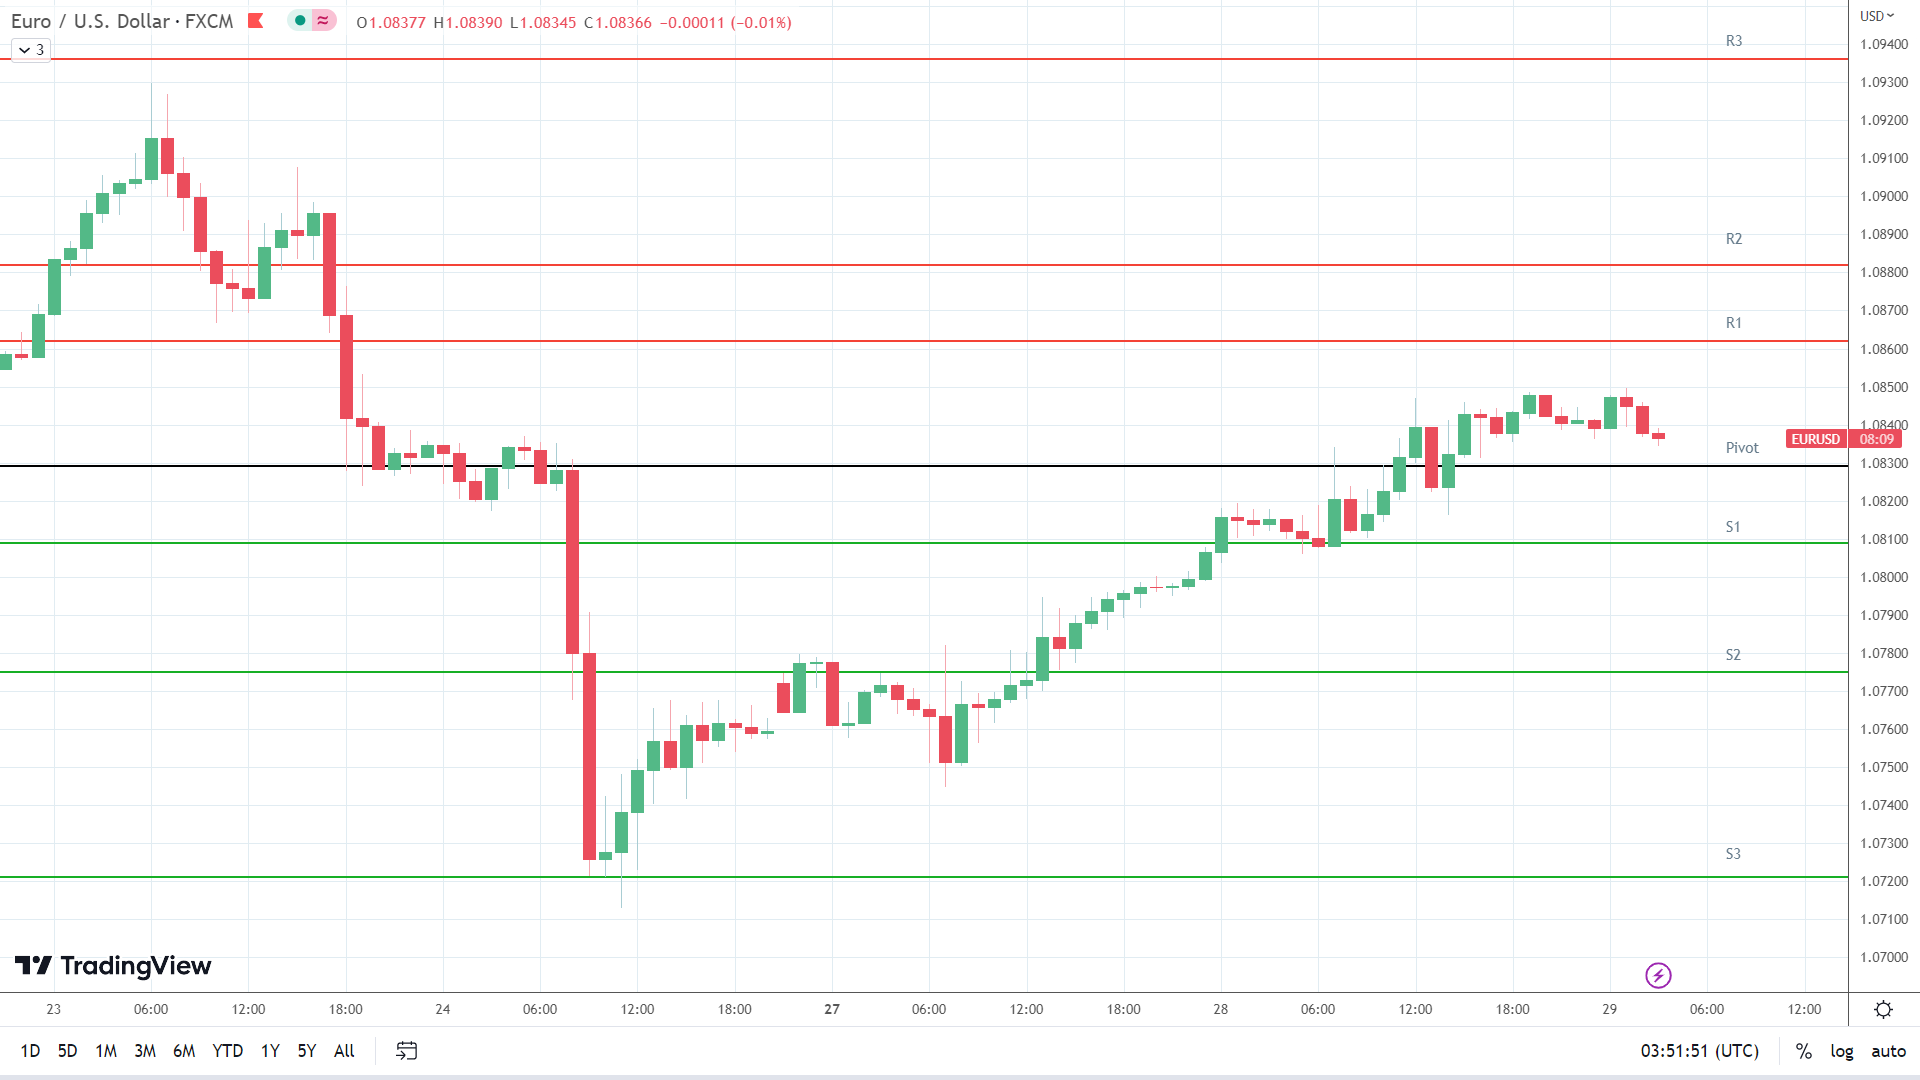 EUR/USD resistance levels in play above the pivot.